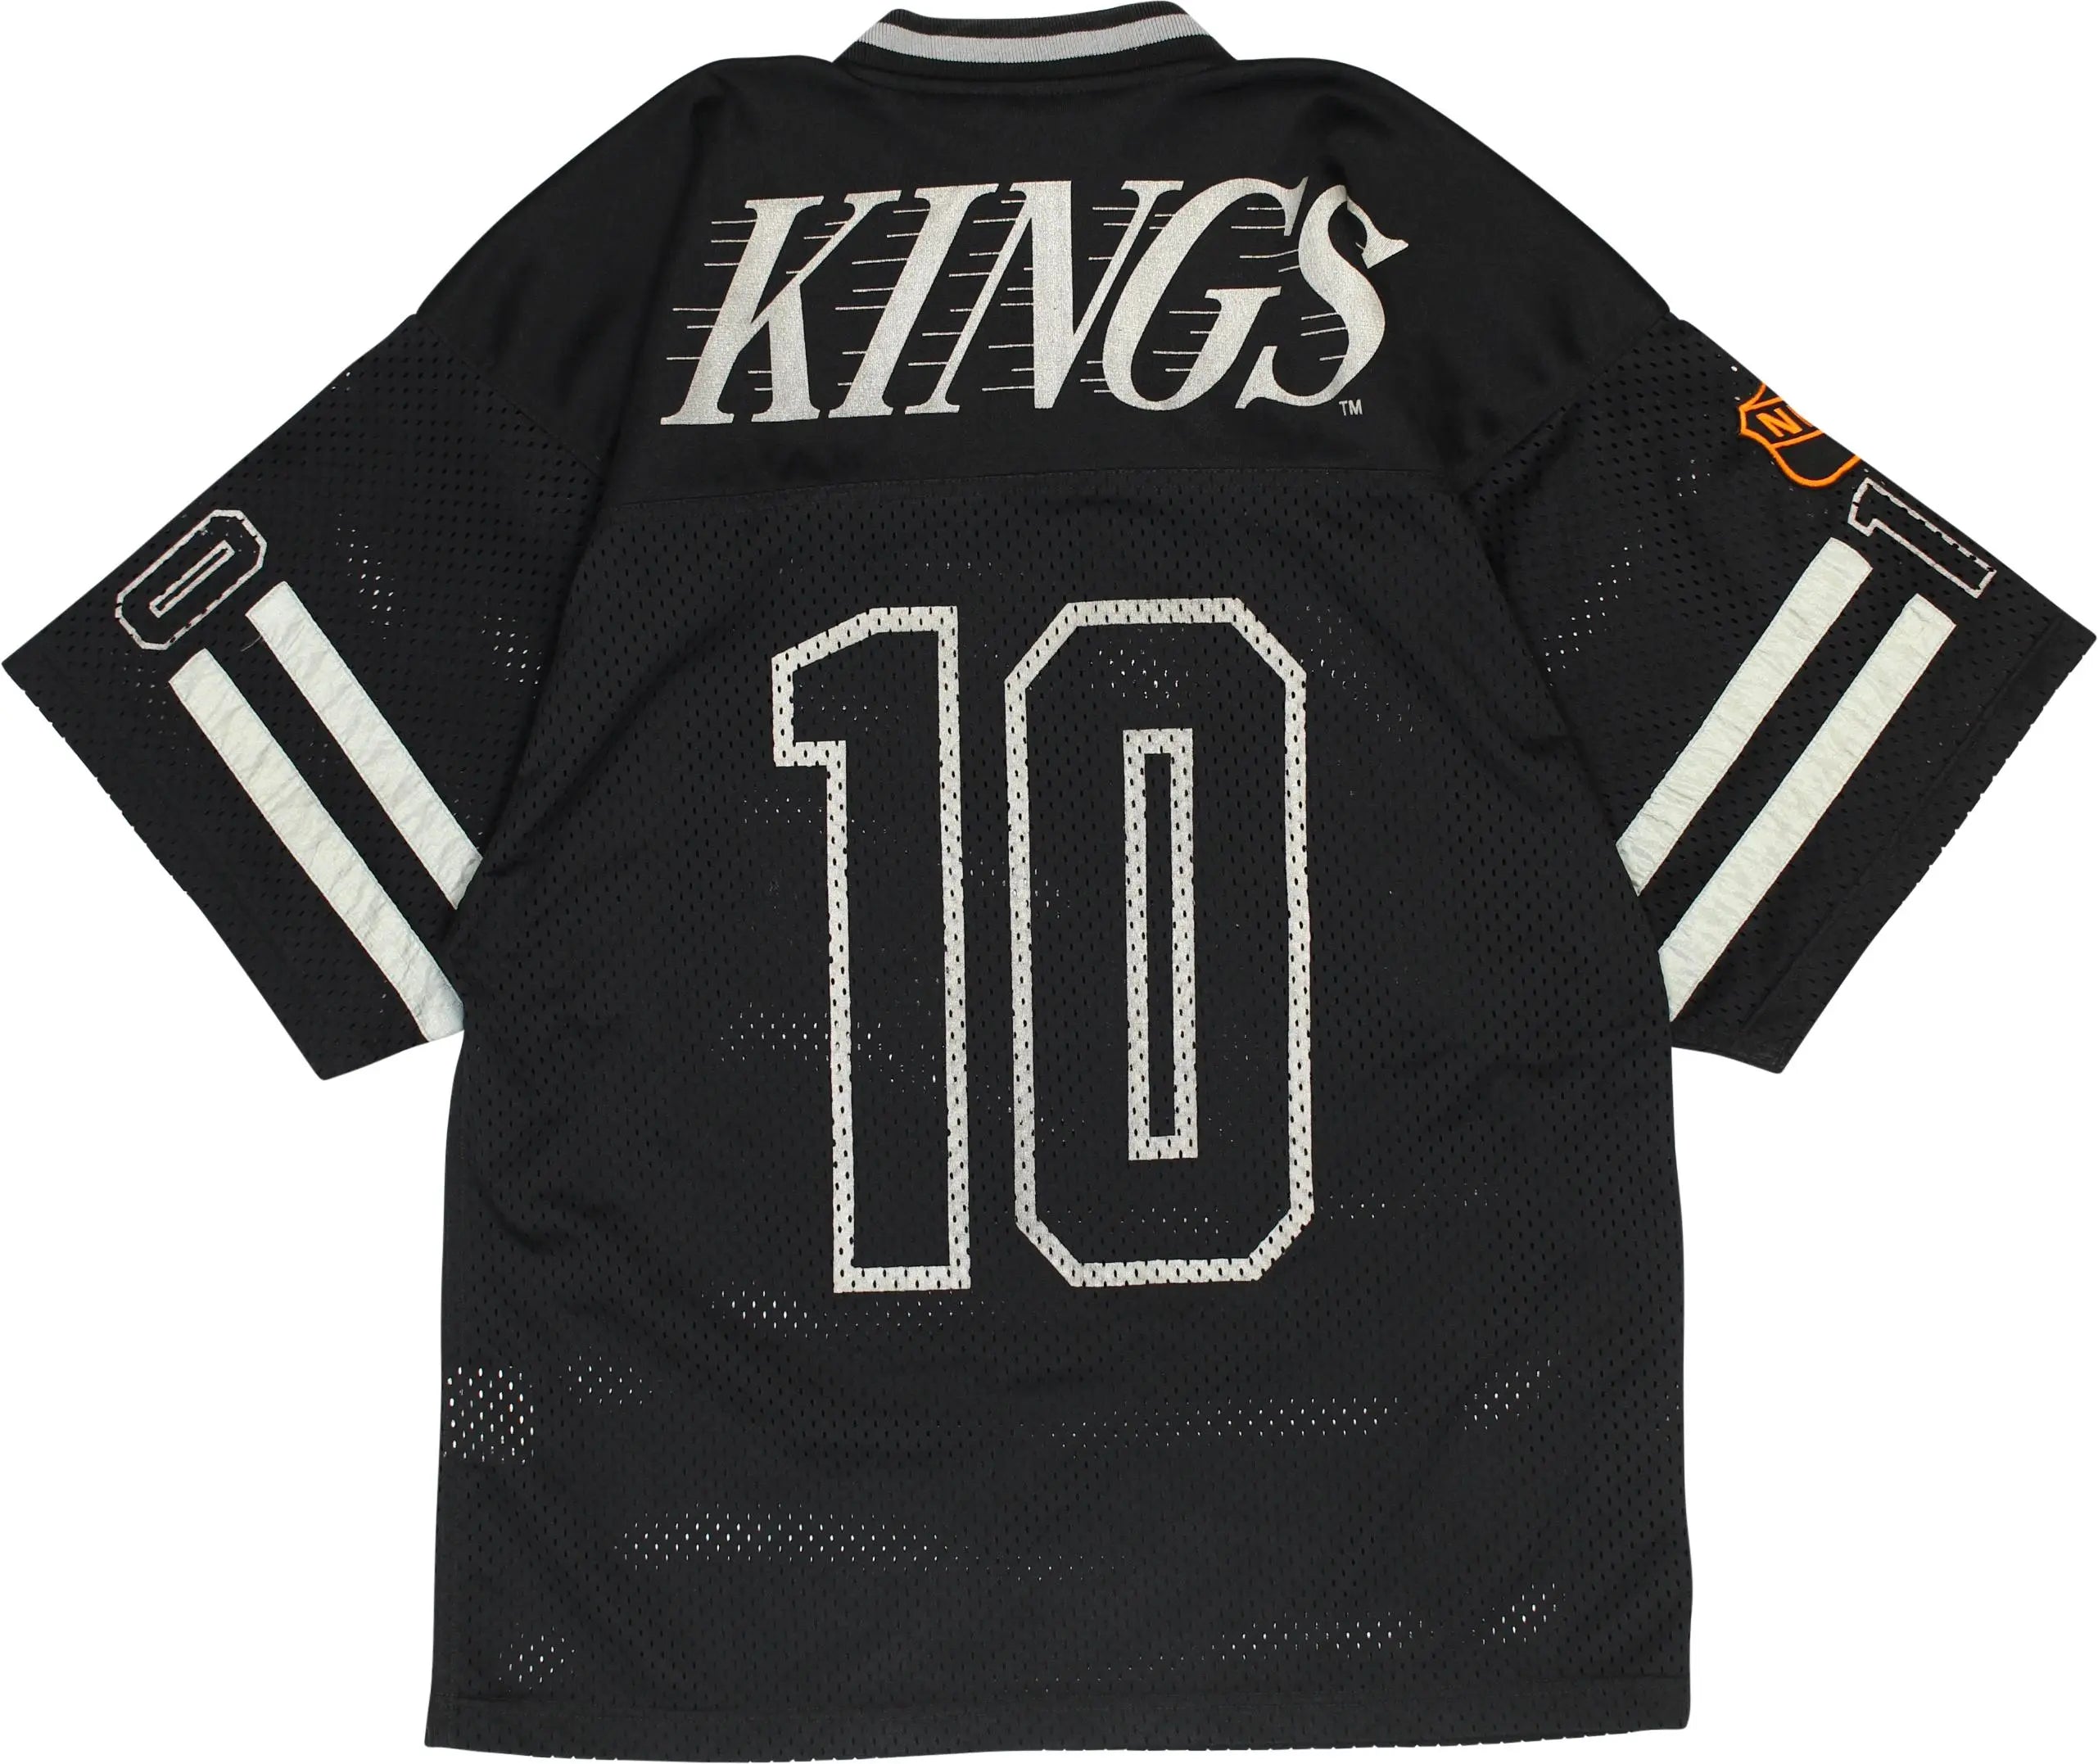 NHL - 90s LA Kings Jersey- ThriftTale.com - Vintage and second handclothing